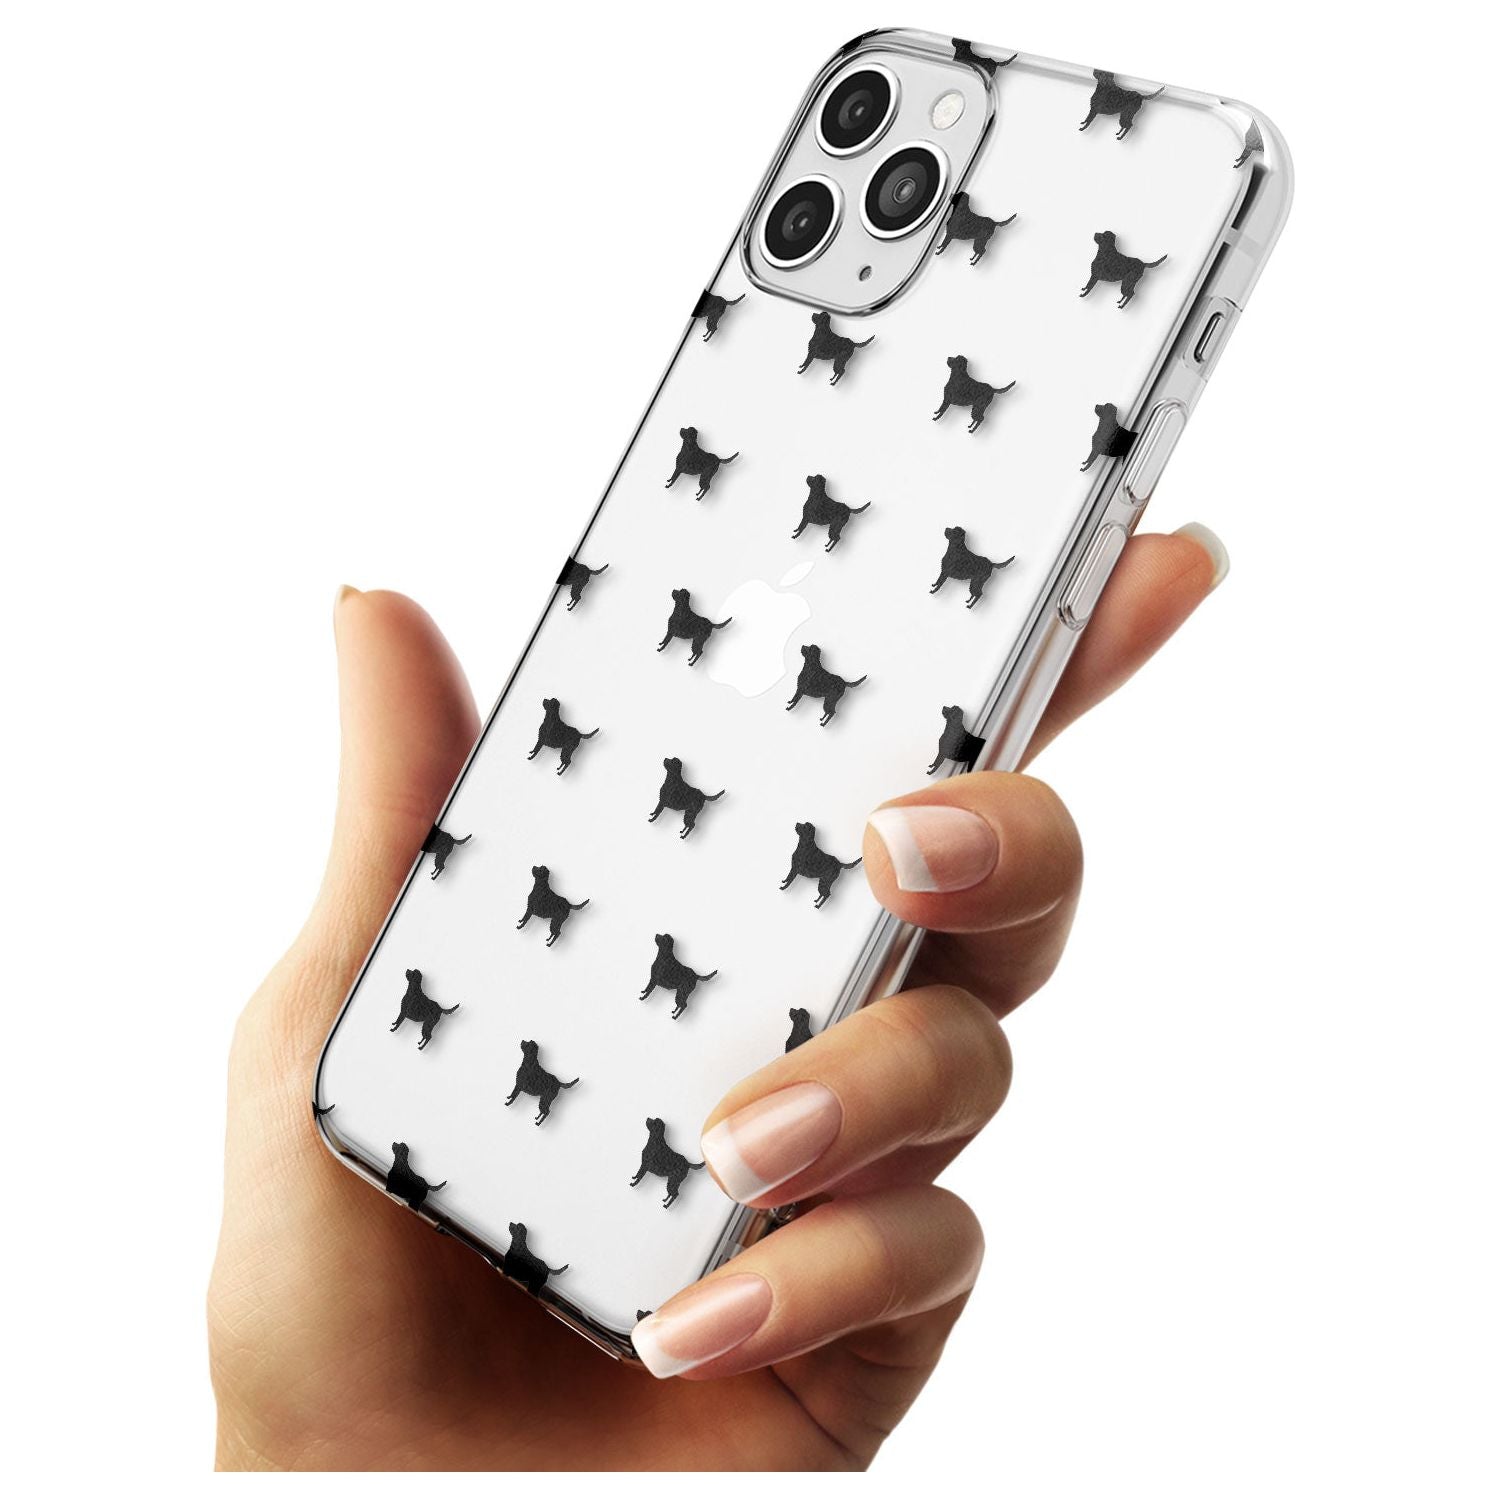 Black Labrador Dog Pattern Clear Slim TPU Phone Case for iPhone 11 Pro Max